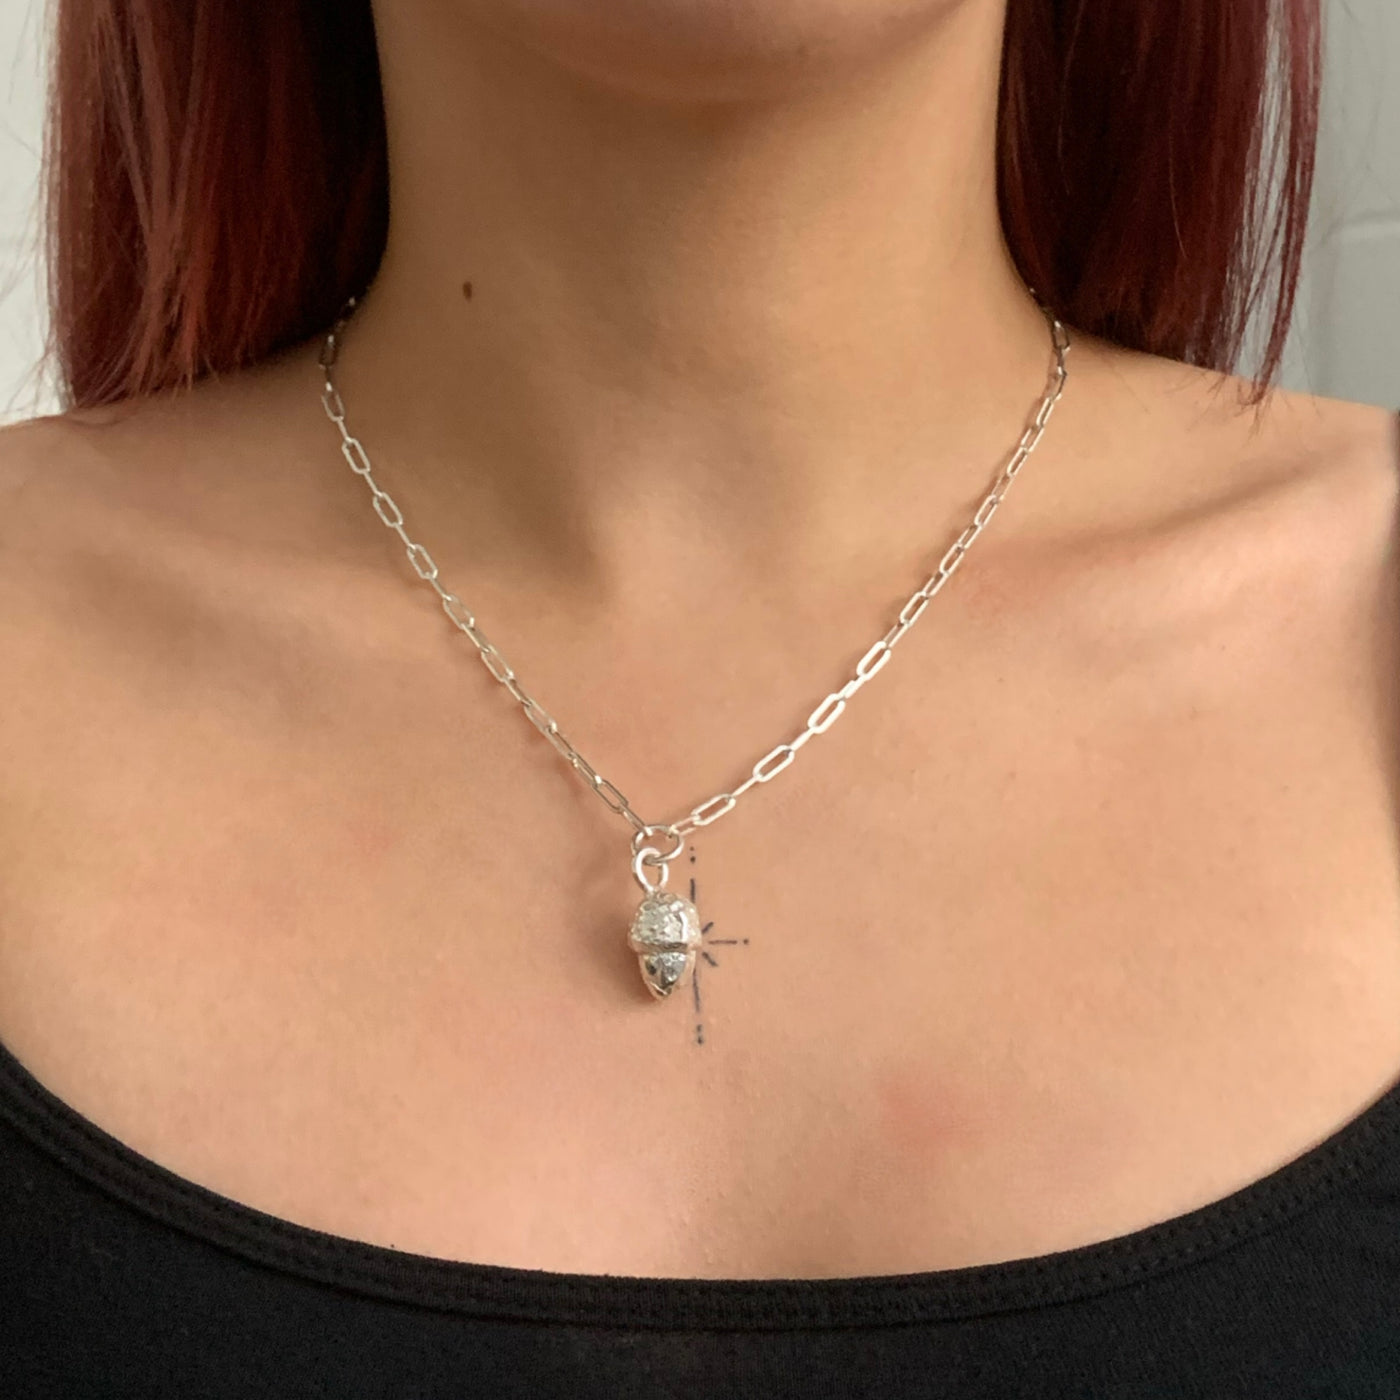 Handmade solid sterling silver acorn charm on a recycled silver trace chain necklace from SilverBoo Jewellery in Lincolnshire